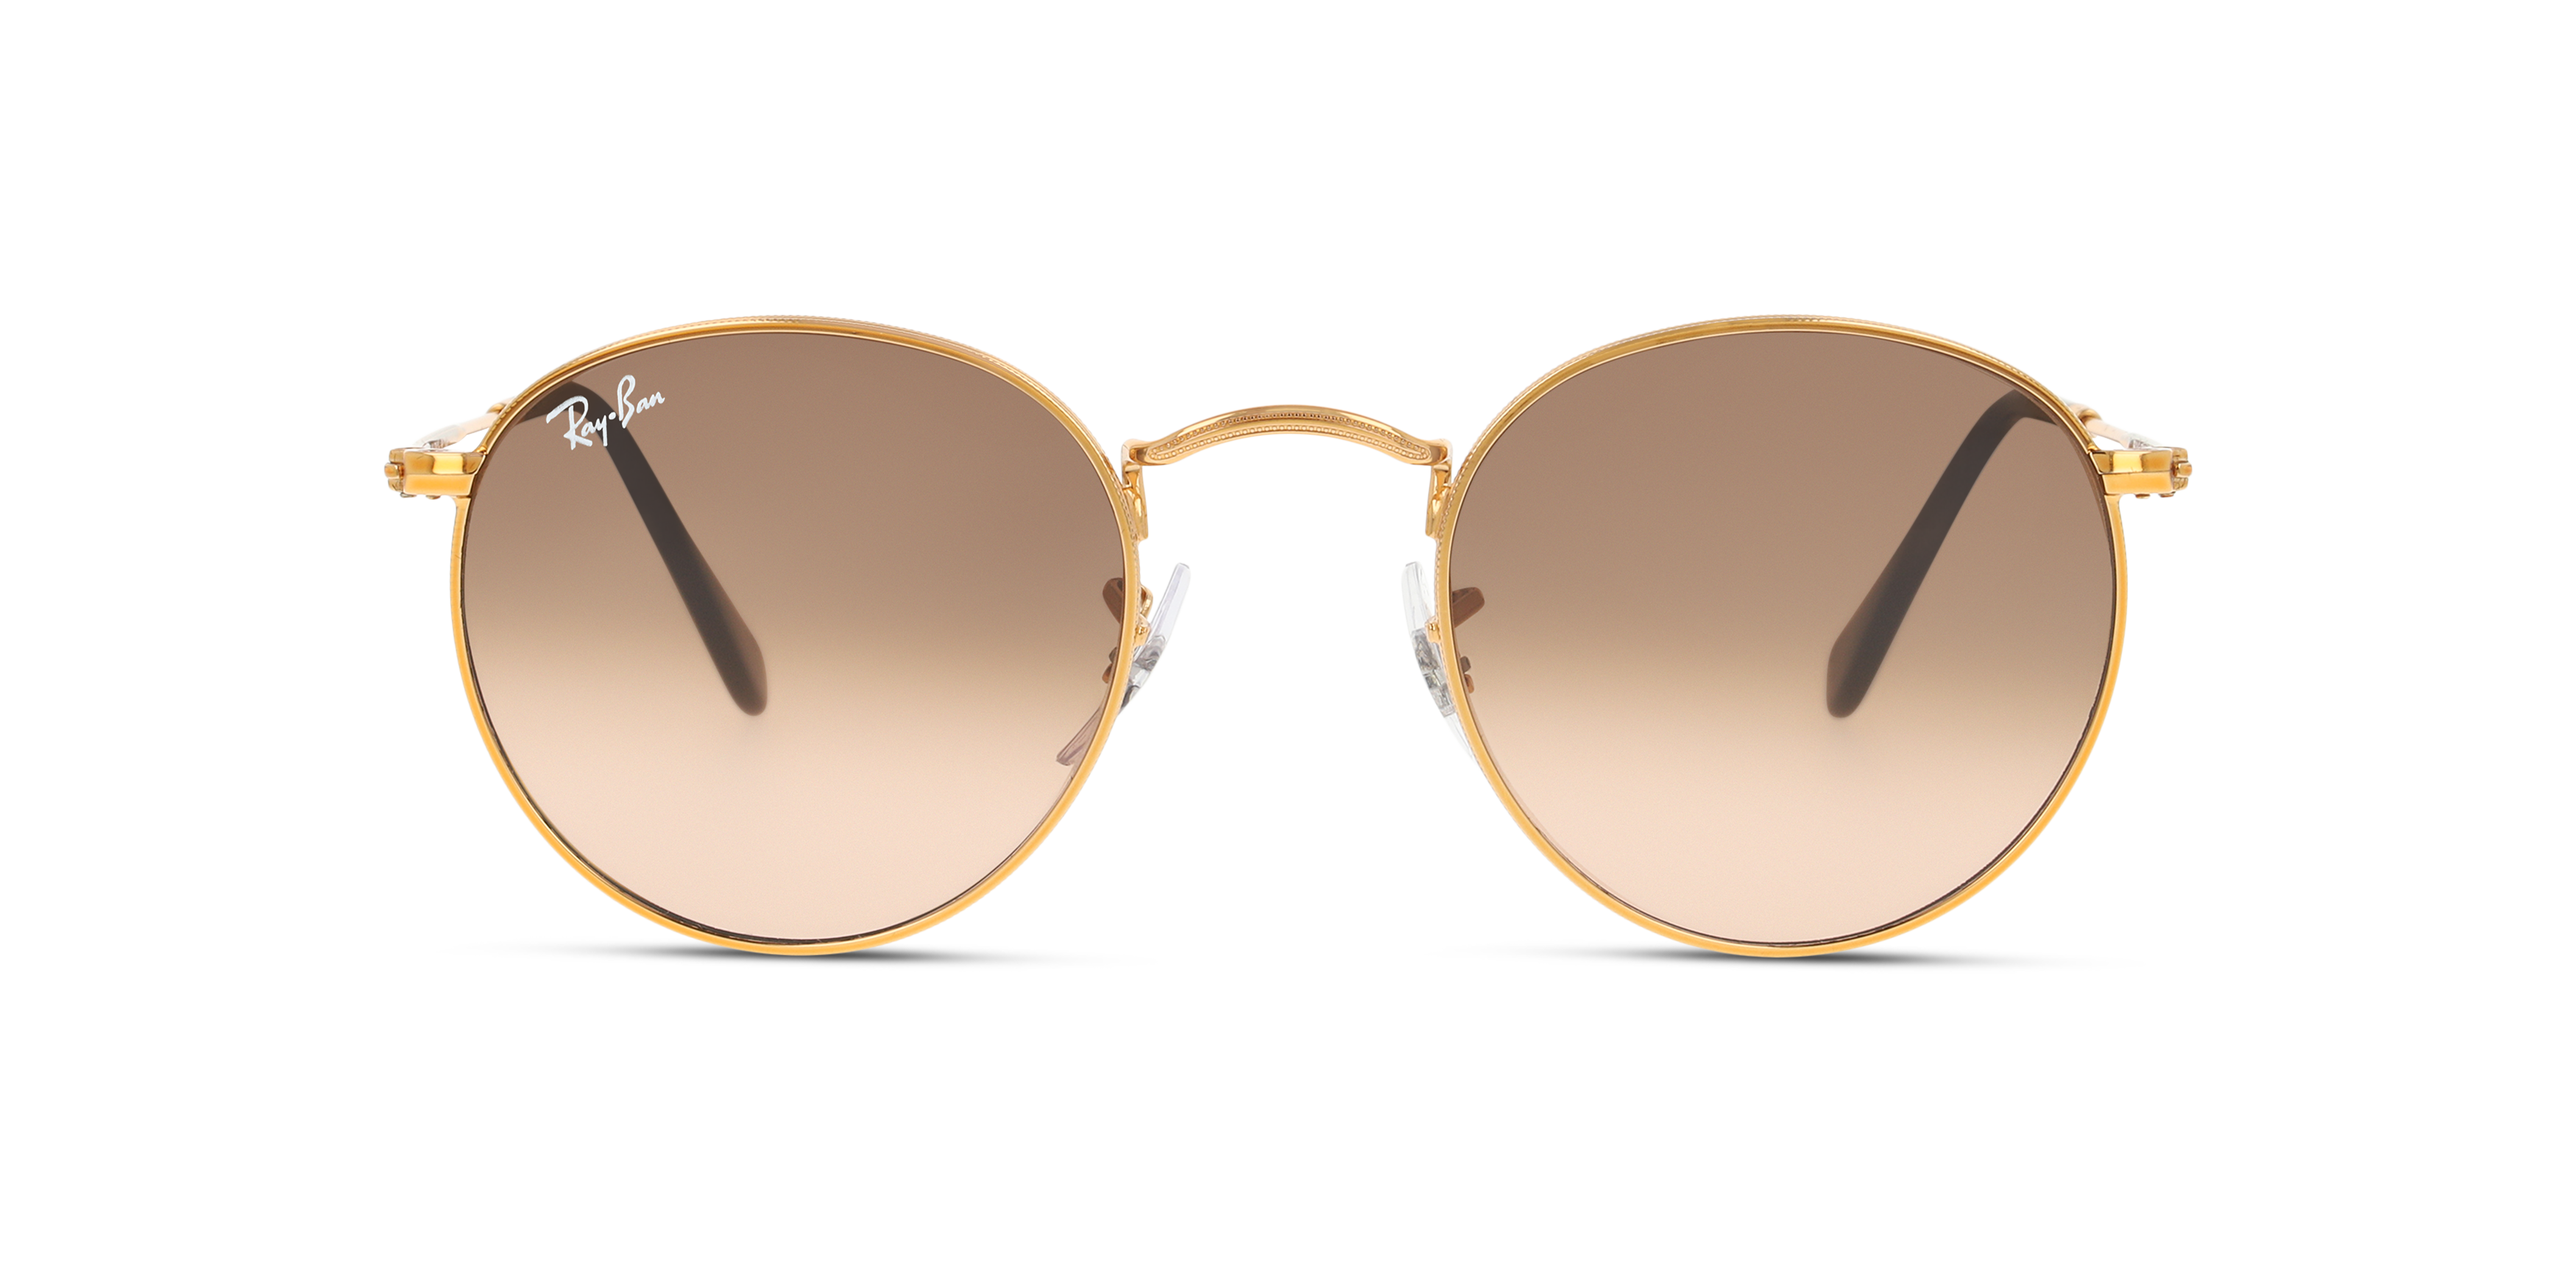 [products.image.front] Ray-Ban Round Metal RB3447 9001A5